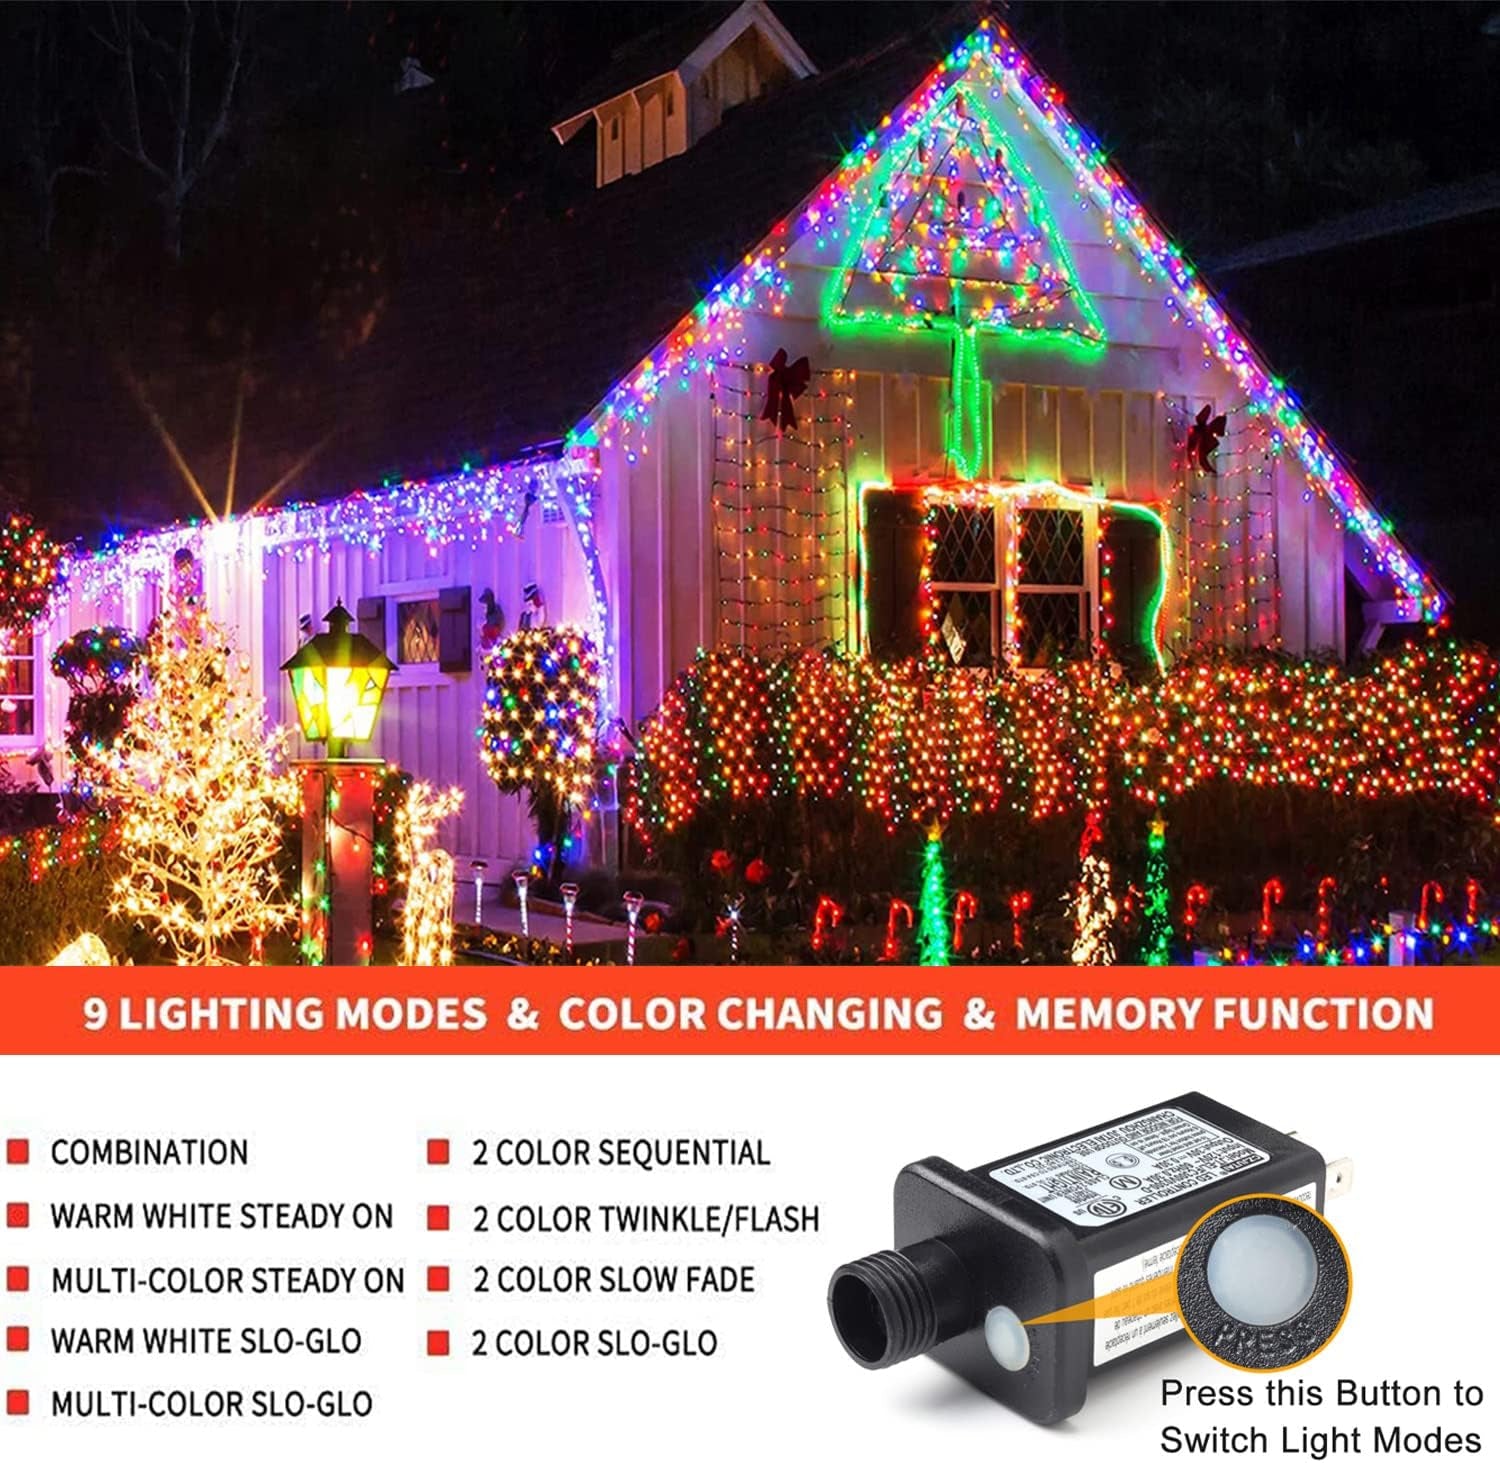 Haili 108FT Color Changing Christmas Lights, 300 LED Christmas Lights Outdoor, UL Certified 9 Lighting Modes for House Christmas Decoration, Christmas Tree Lights with Timer Remote